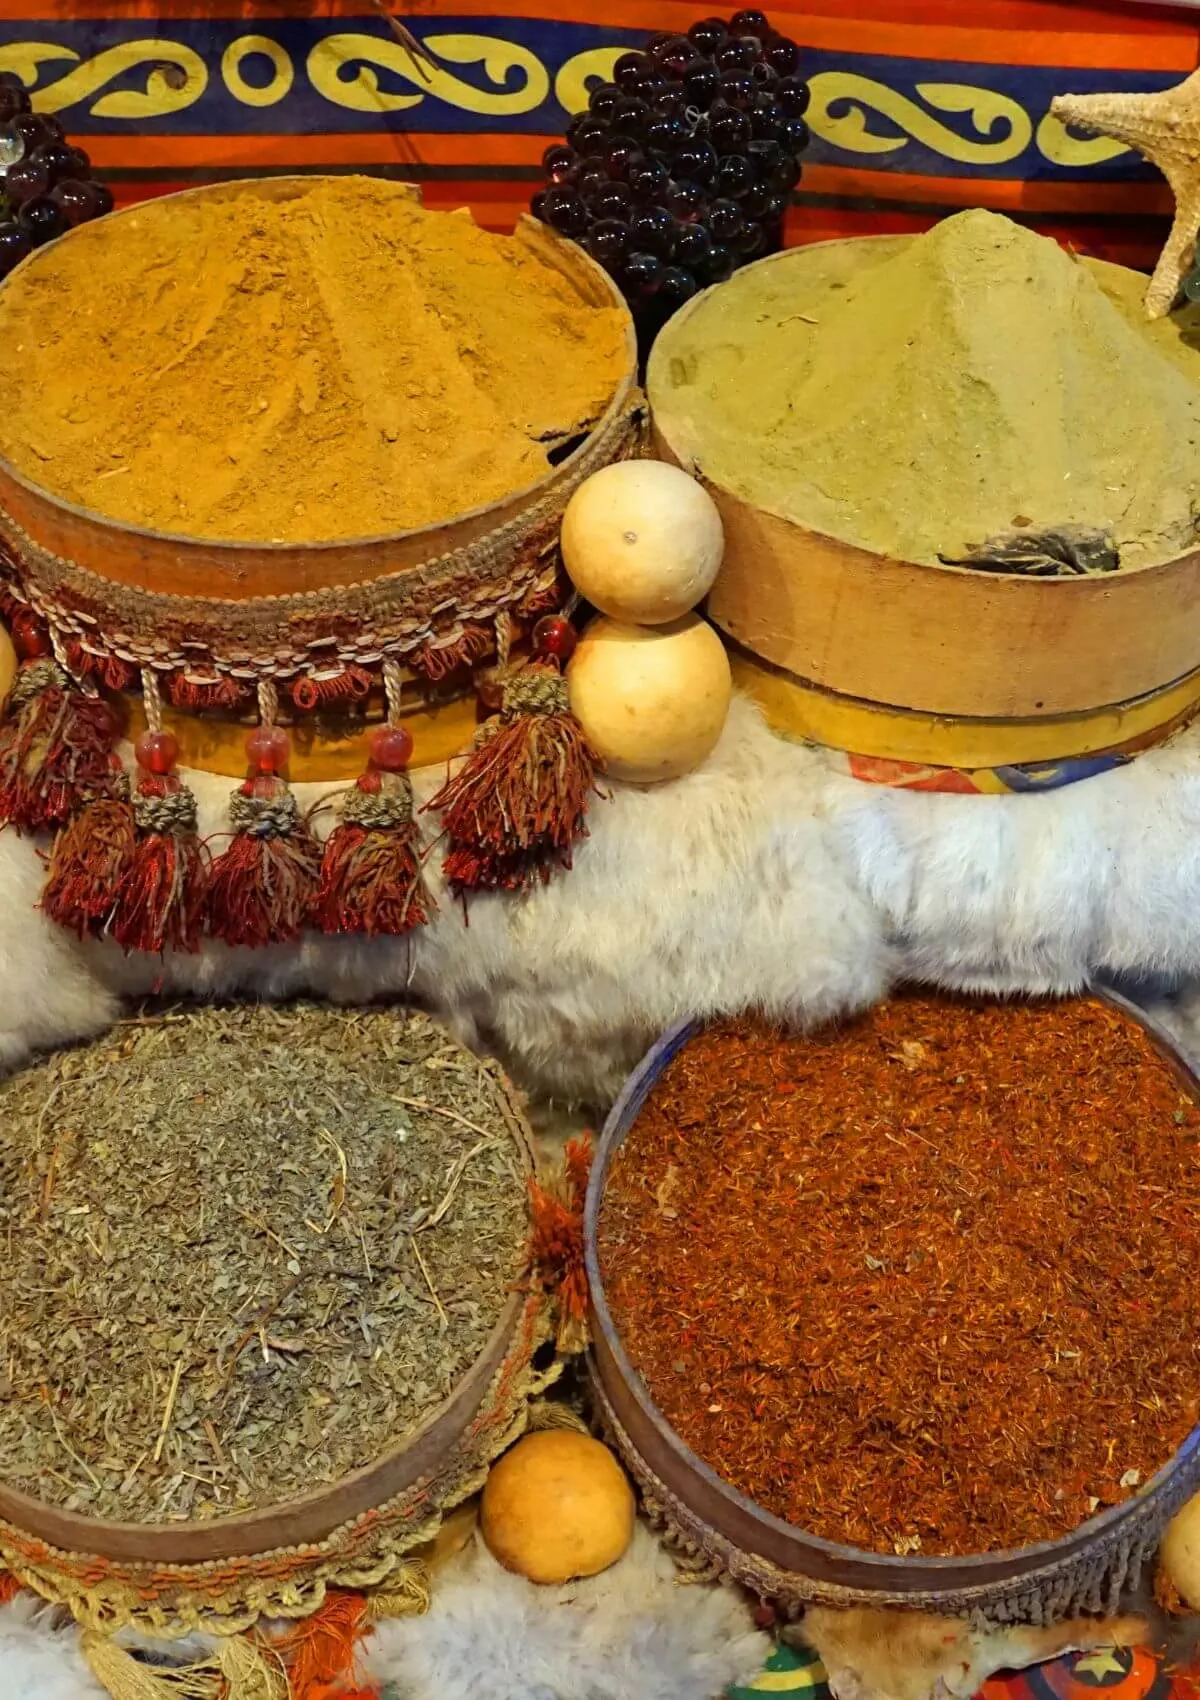 Spices double up as delicious souvenirs from Egypt